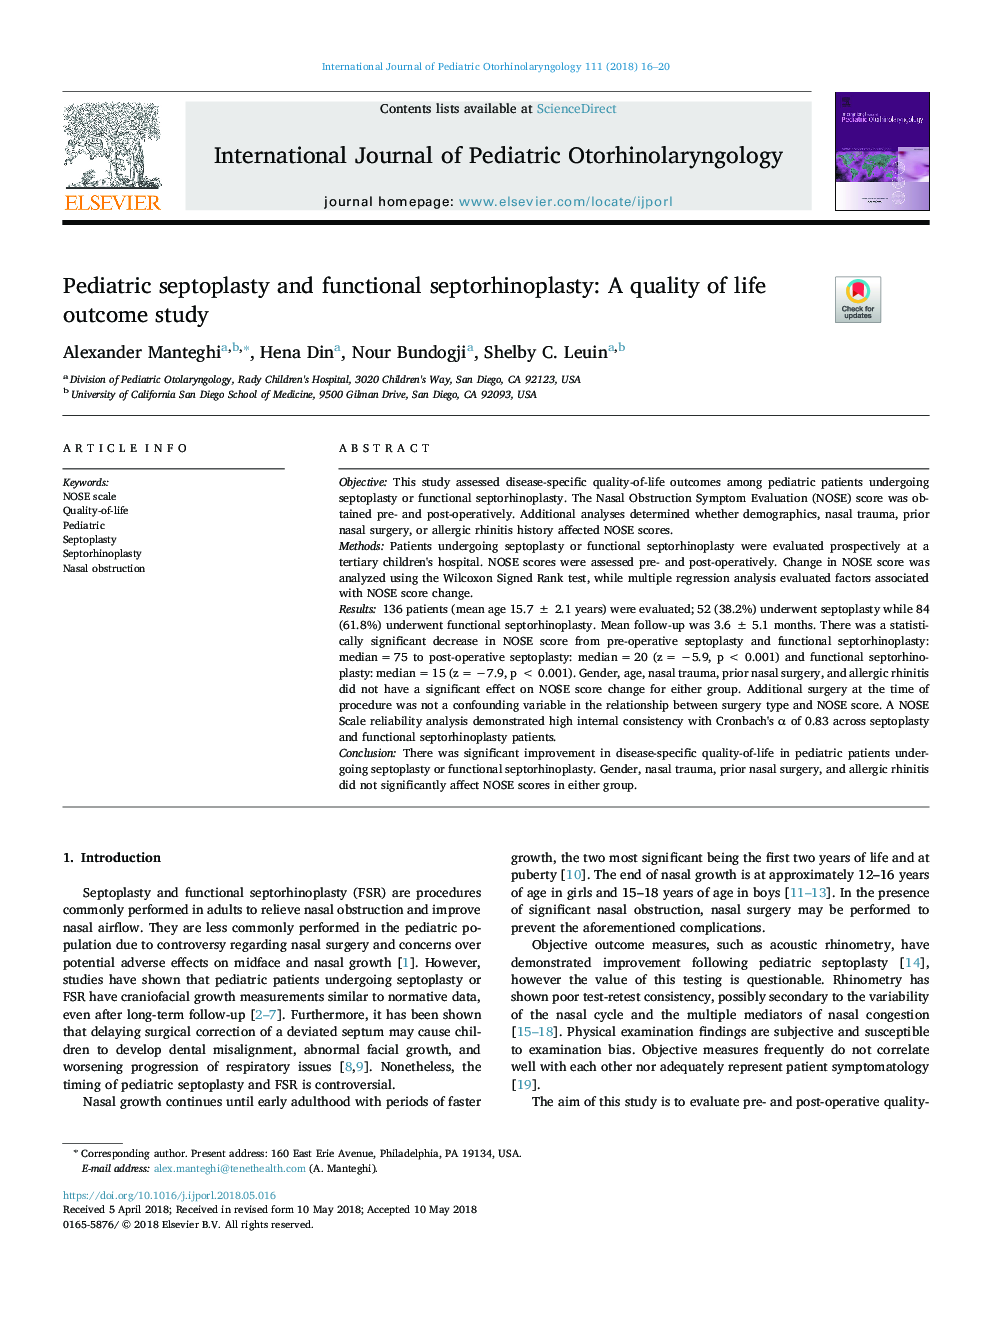 Pediatric septoplasty and functional septorhinoplasty: A quality of life outcome study